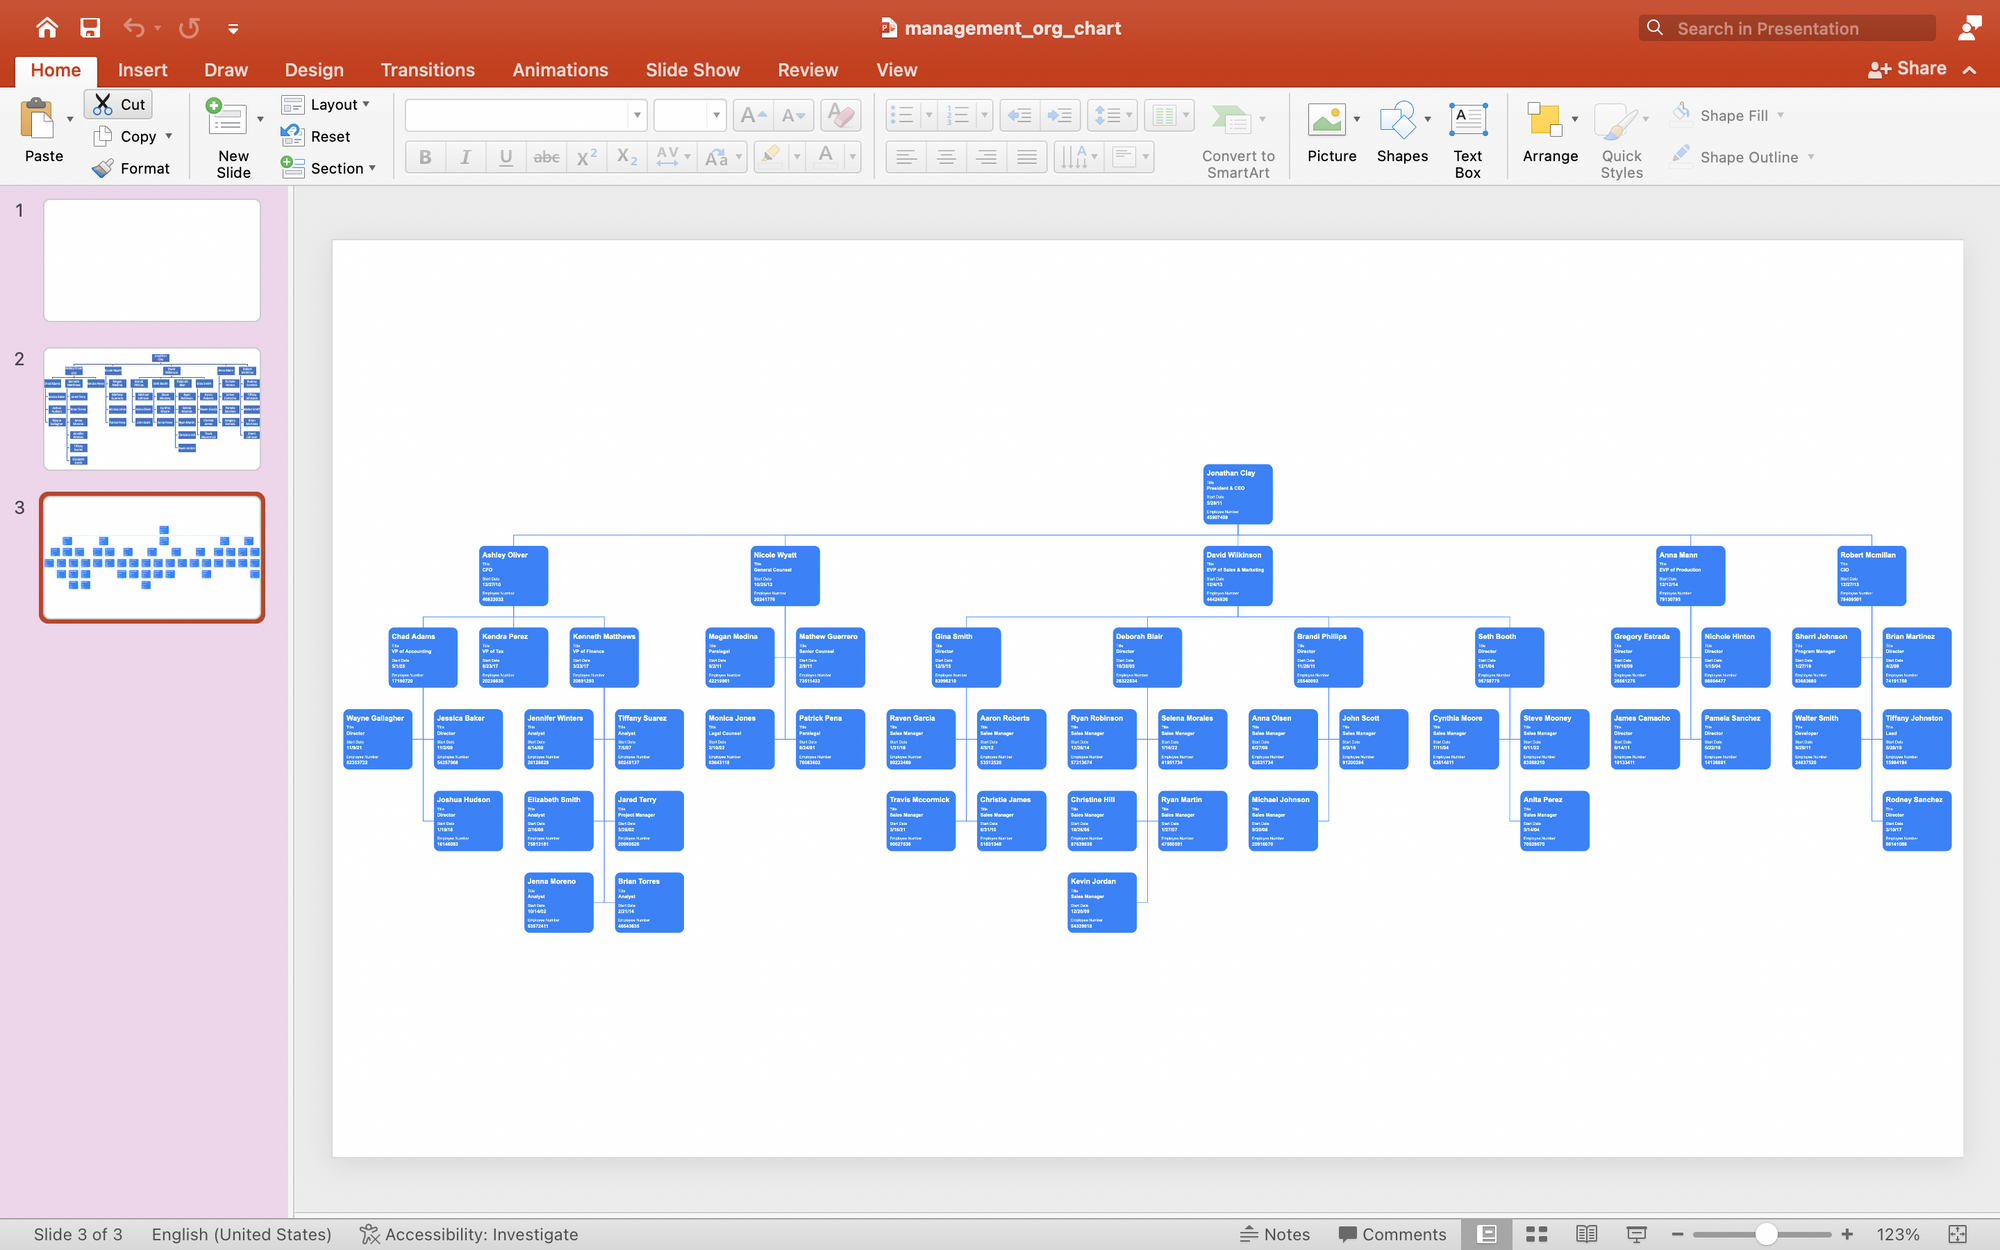 PowerPoint can both make and present organzation charts, even though that is not a good idea.